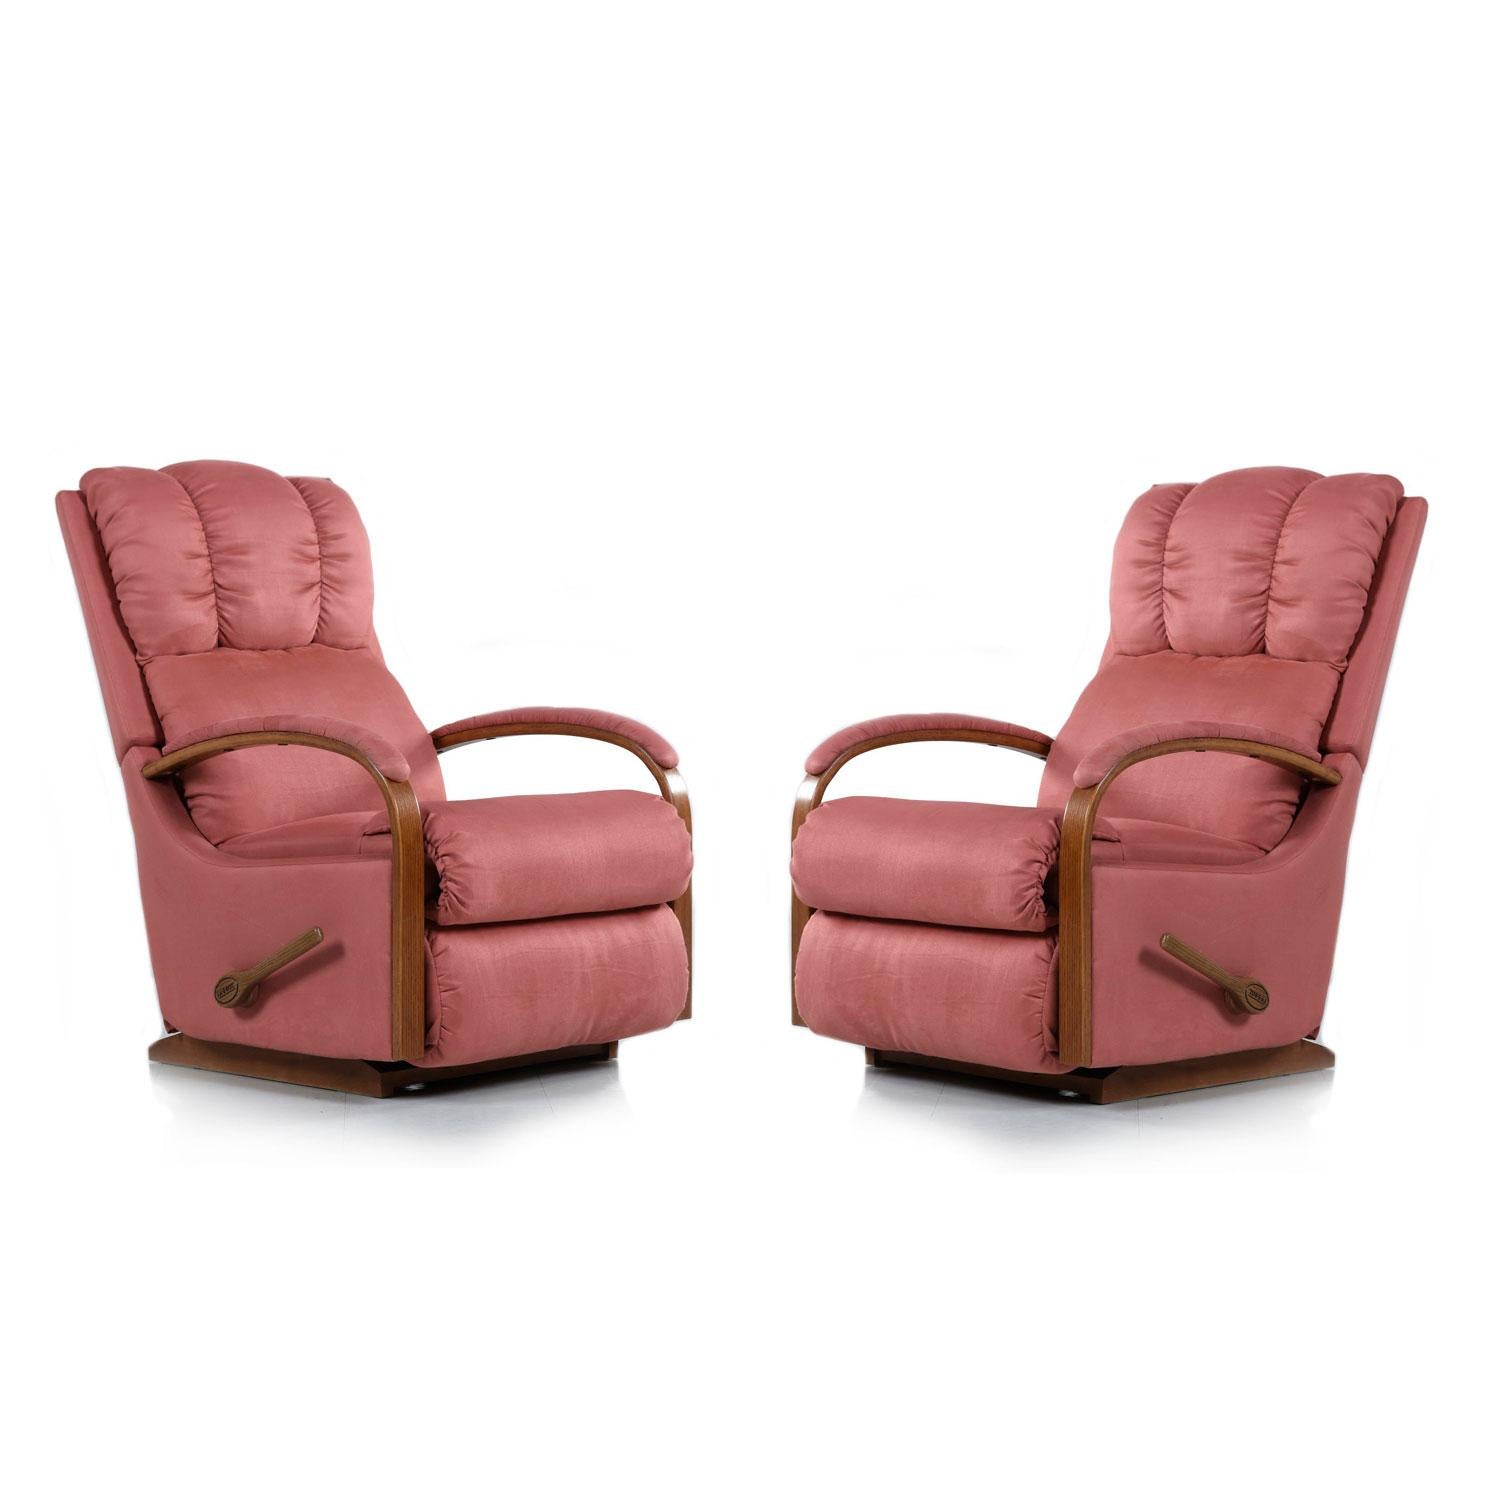 Well.... here we are. You woke up this morning with no idea that you would be drooling over a rose colored La-Z-Boy, but that's what happened. Don't second guess your instincts, these chairs are truly amazing. We purchased these chairs from the